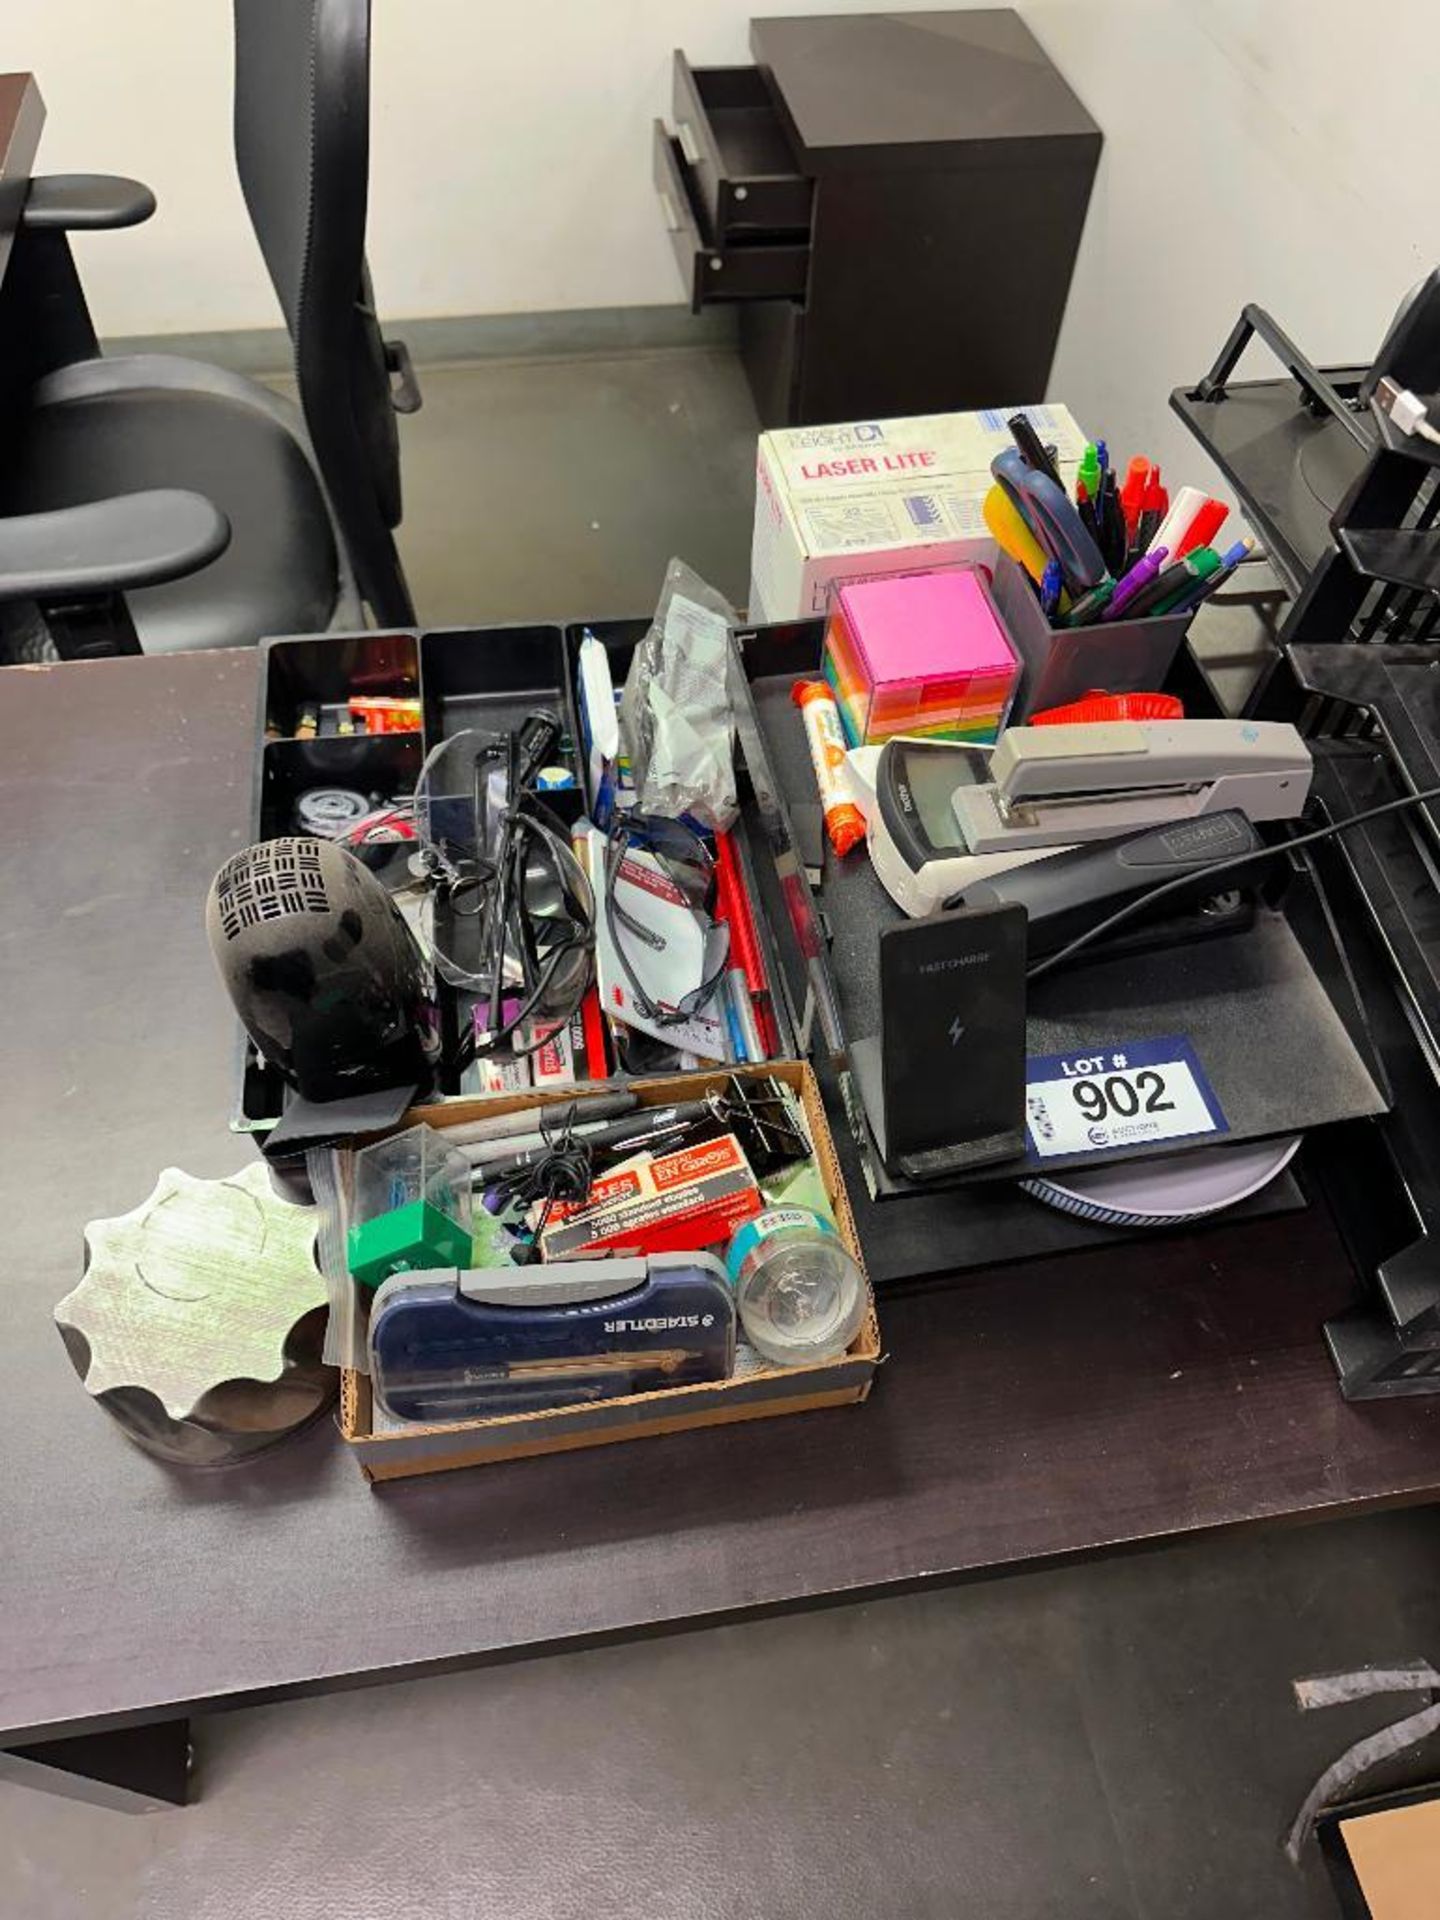 Lot of Asst. Office Supplies including File Organizers, Staplers, Label Maker, etc. - Image 4 of 12